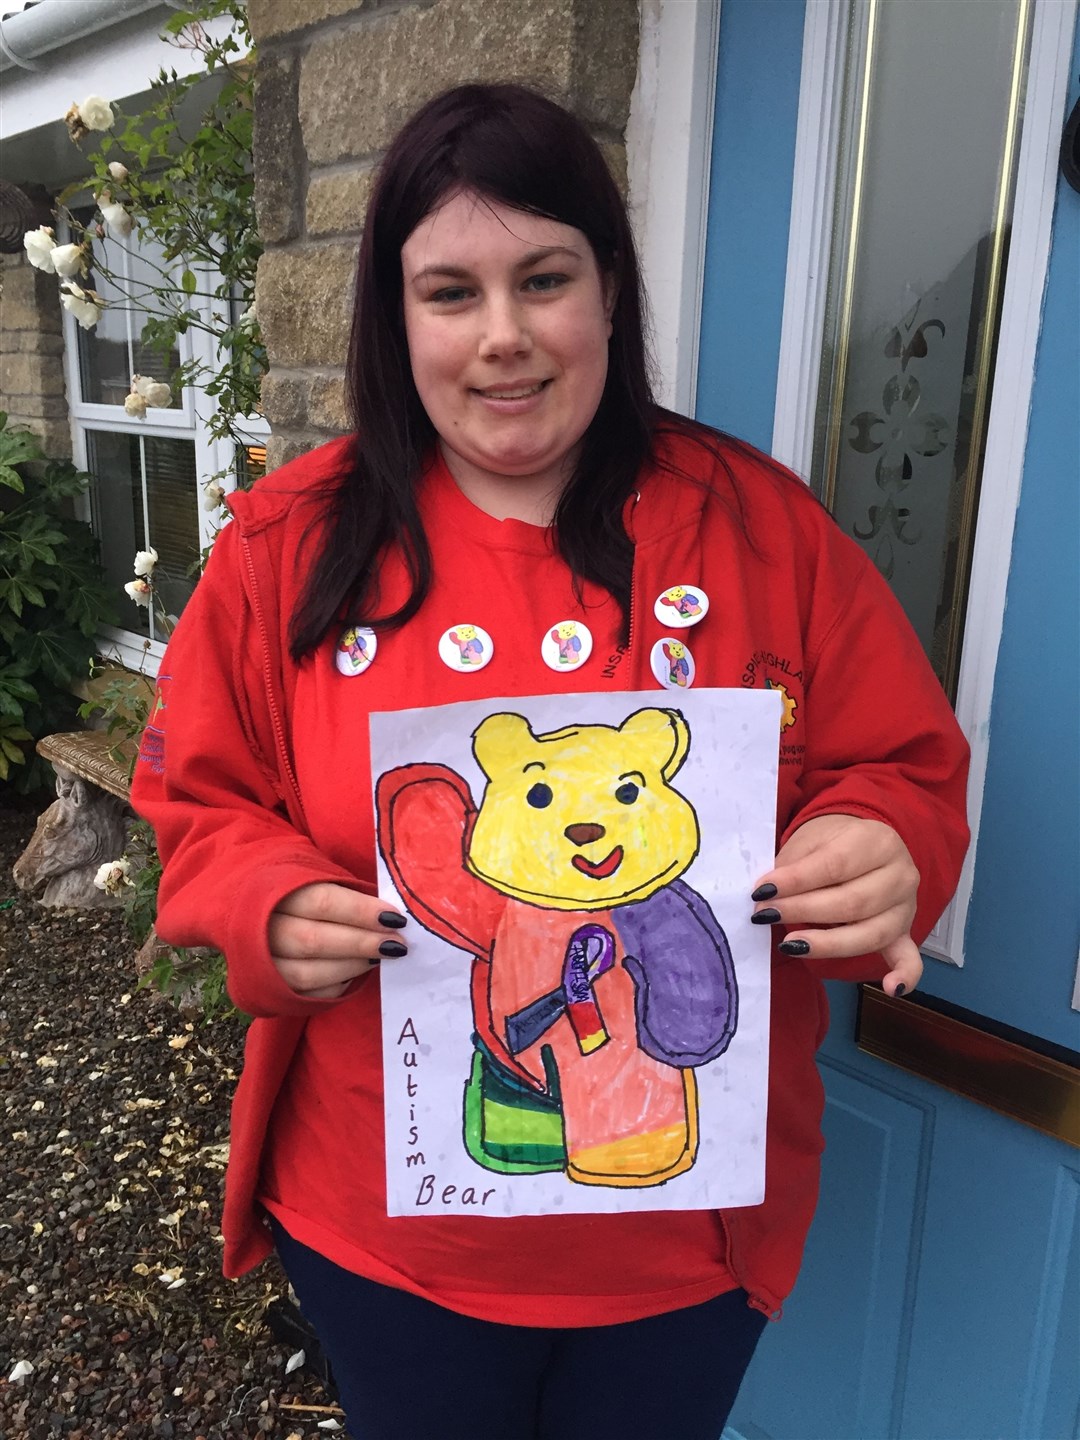 Hayley Reid and the colourful, eye-catching autism bear she hopes will spread awareness.